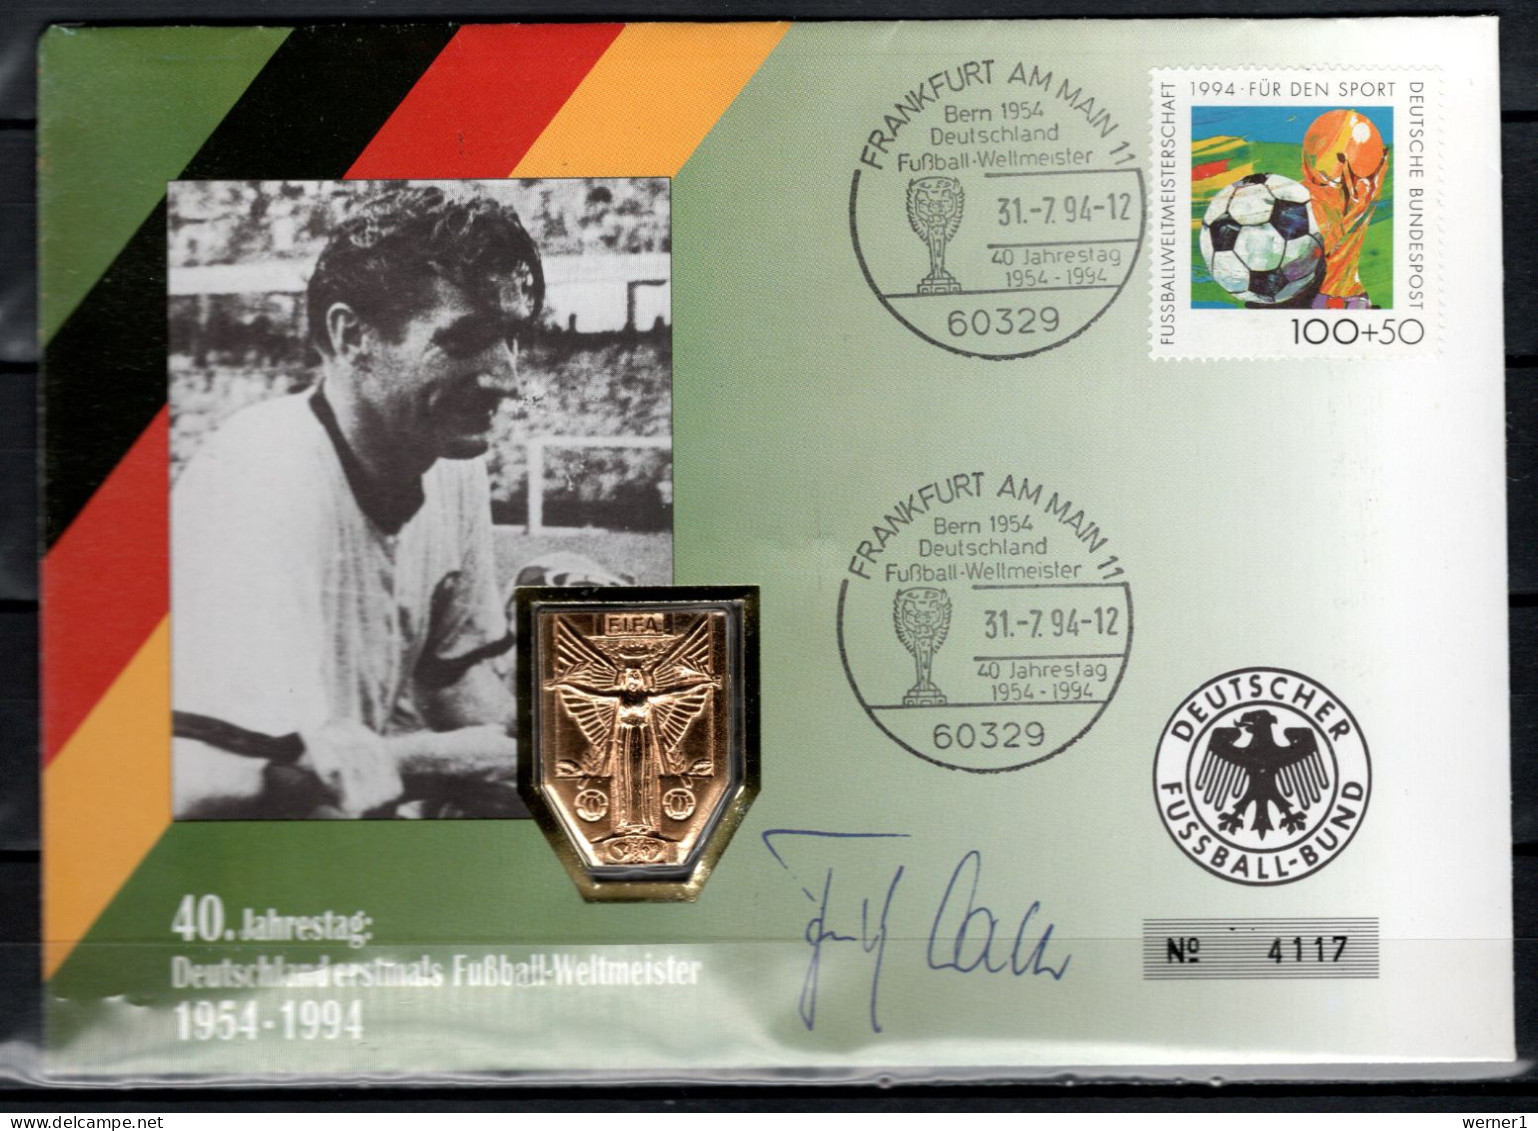 Germany 1994 Football Soccer World Cup Commemorative Cover With Medal And Original Signature Of Fritz Walter - 1994 – Vereinigte Staaten